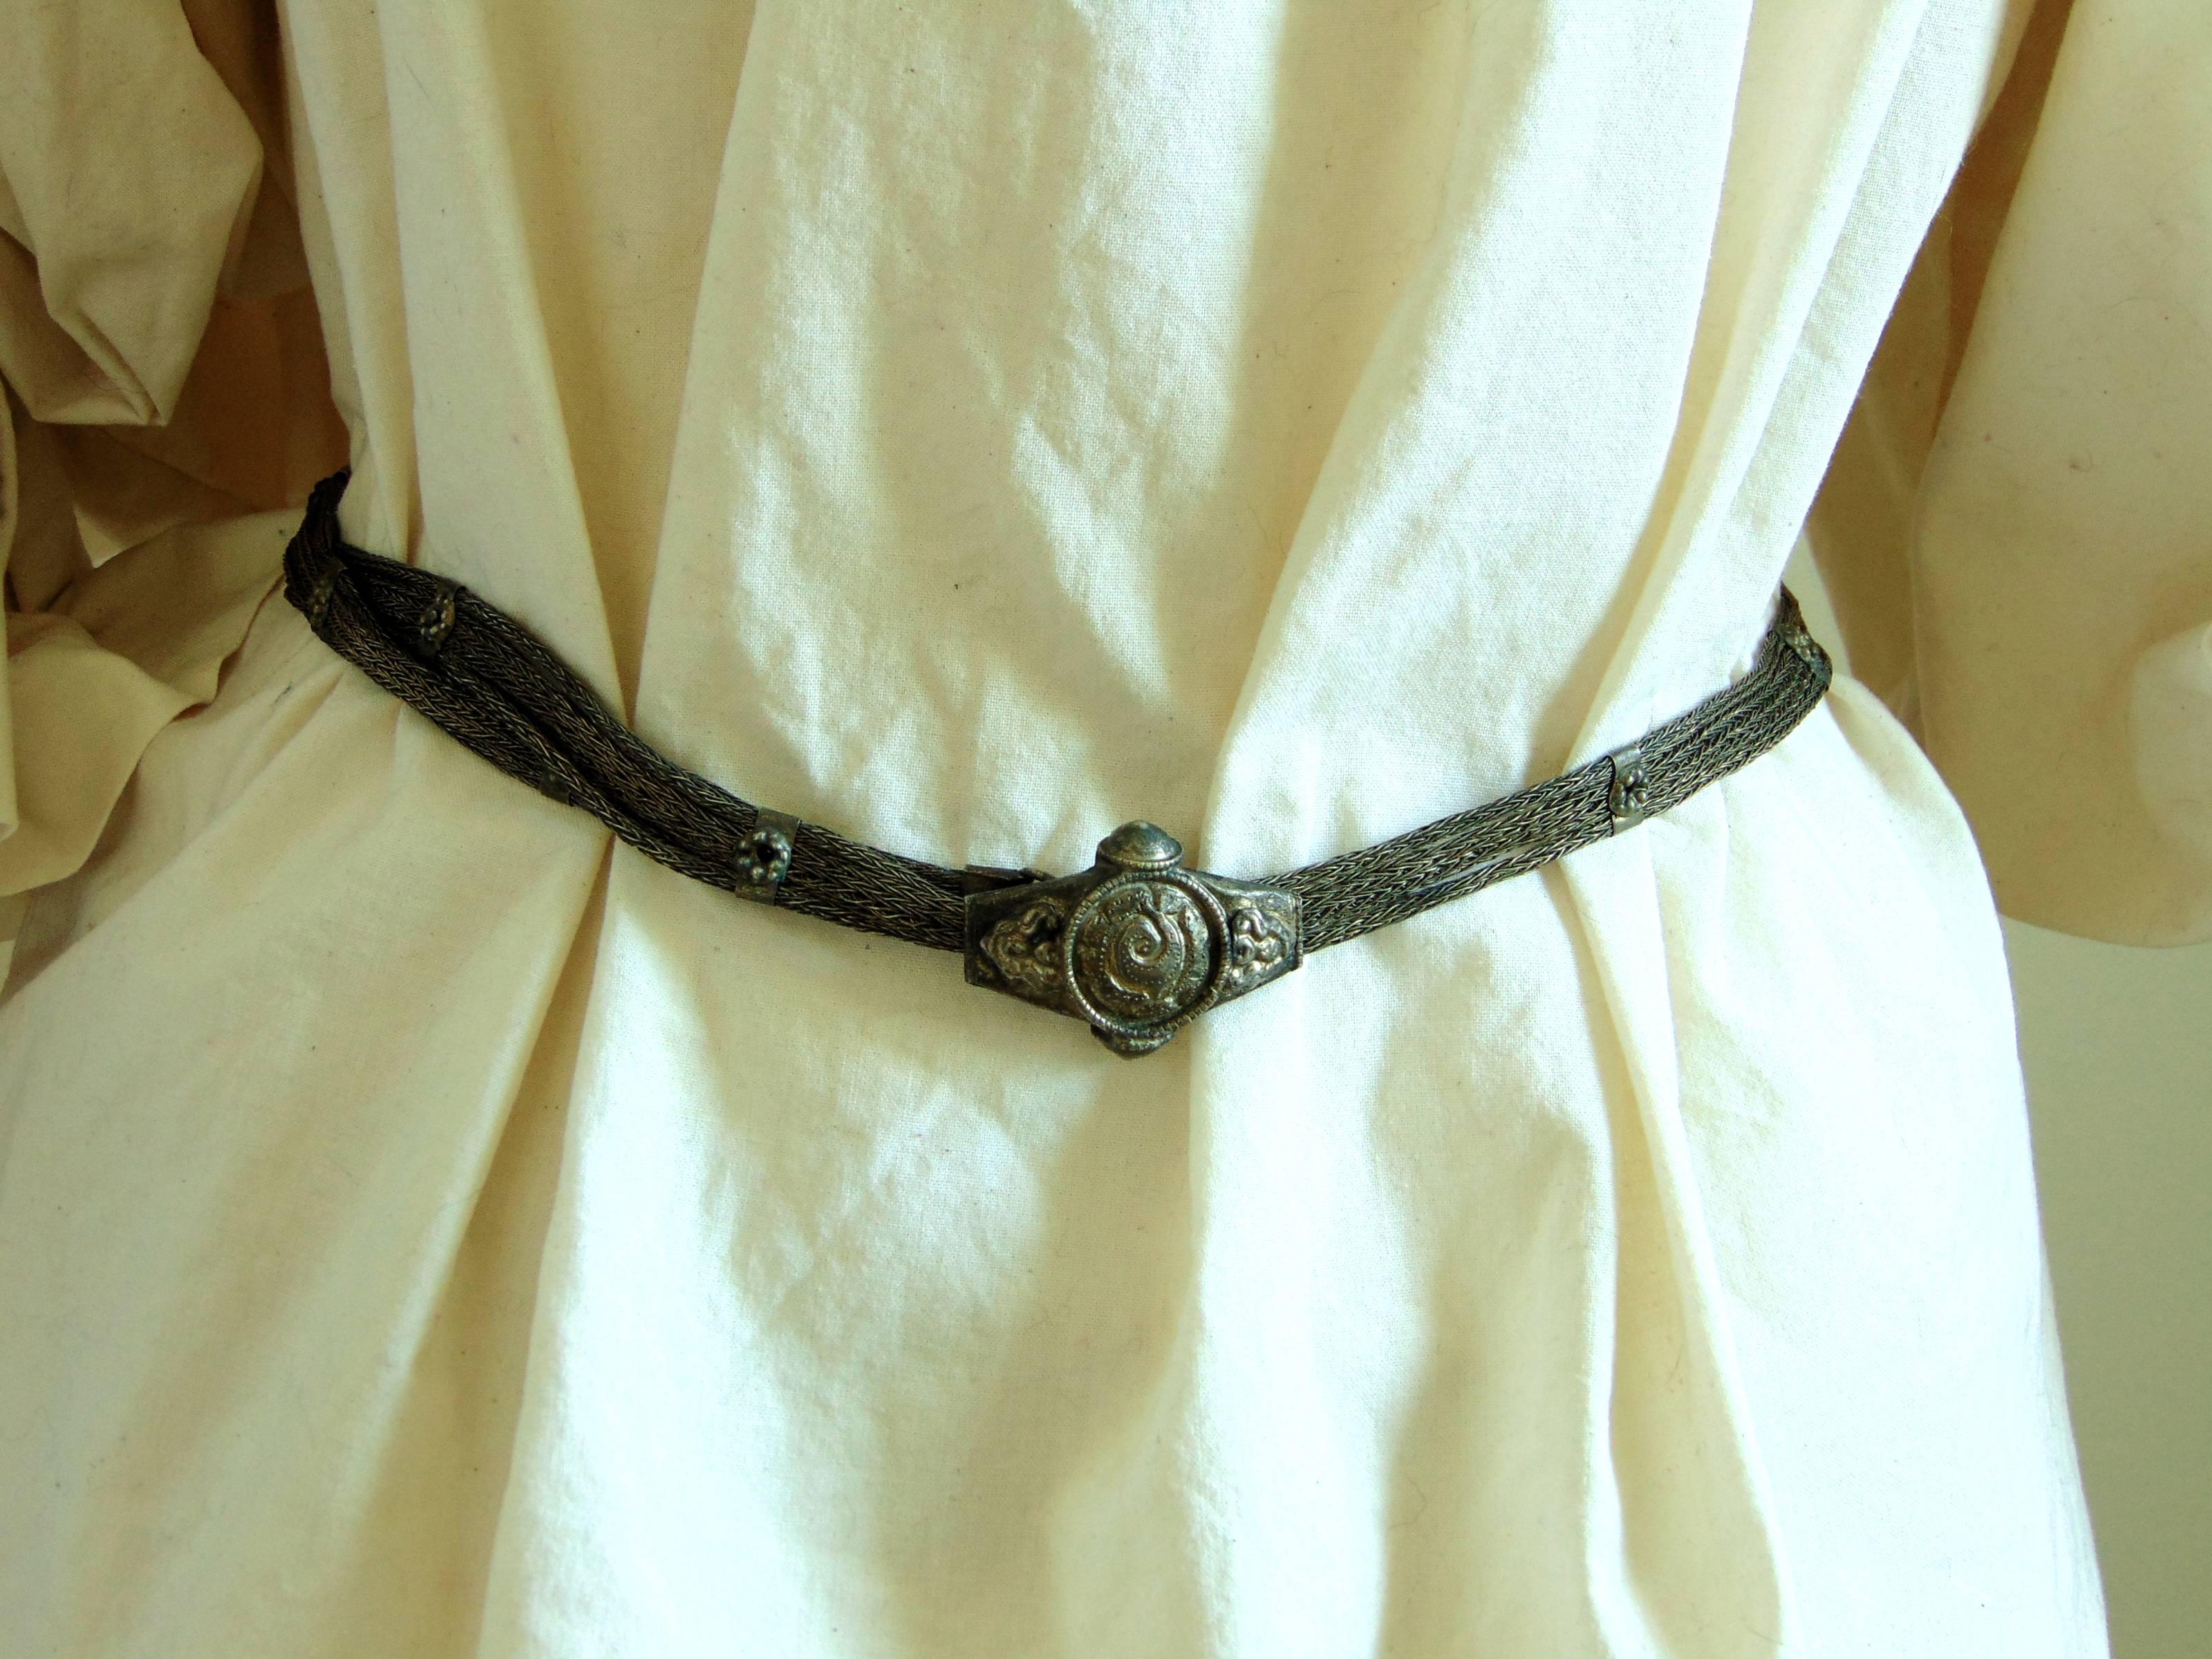 Women's Antique Rajasthani India Belt with Trichinopoly Chain Floral Motif Silver 1900s